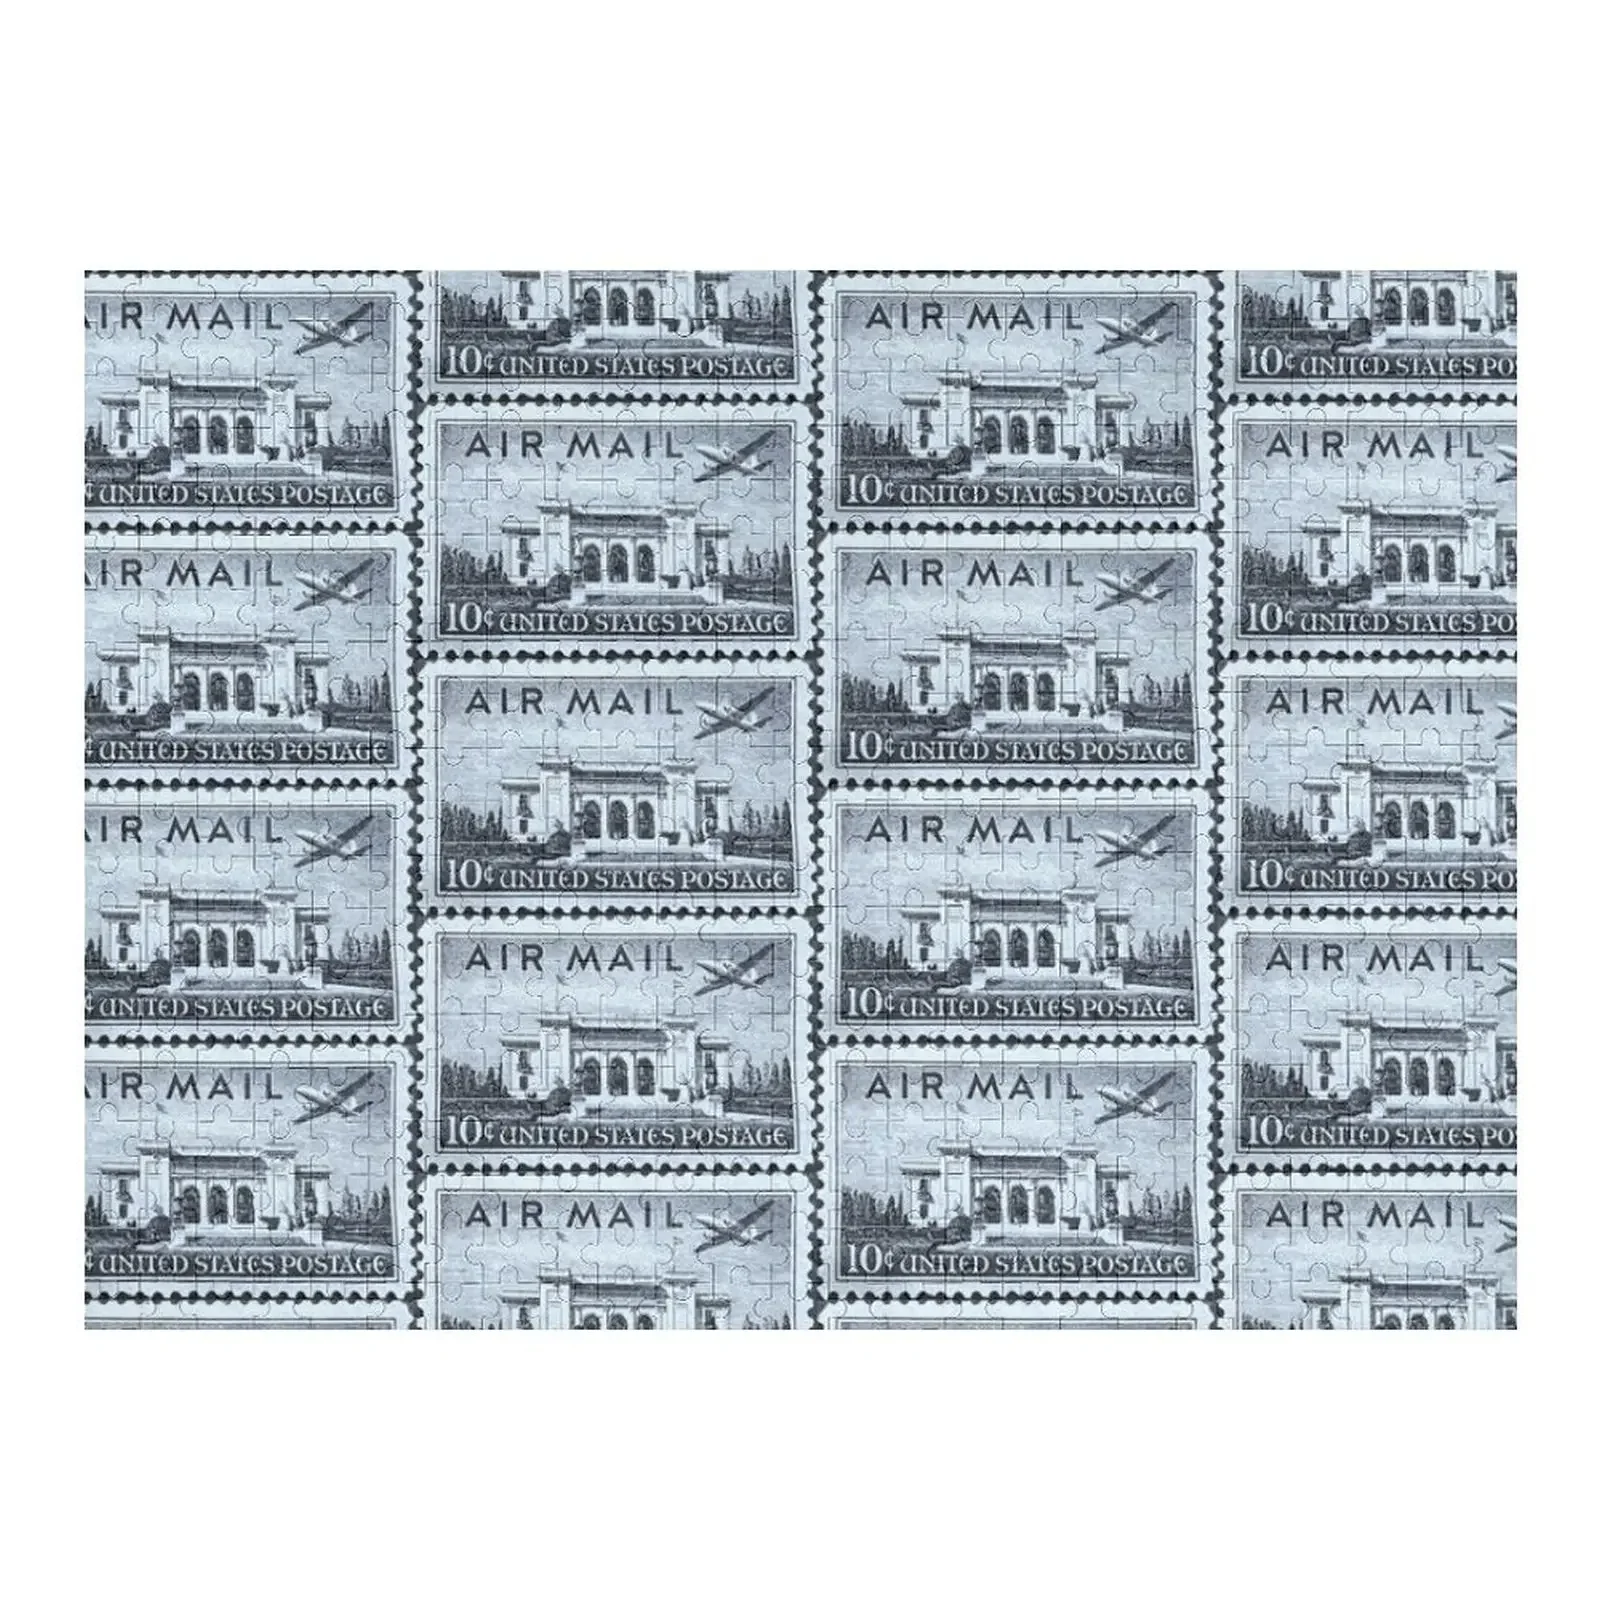 Pan American Building Air Mail Vintage Postage Stamp Jigsaw Puzzle Photo Iq Jigsaw Custom Works Of Art Puzzle 32pcs travel postcard vintage landscape building photo picture poster post pards